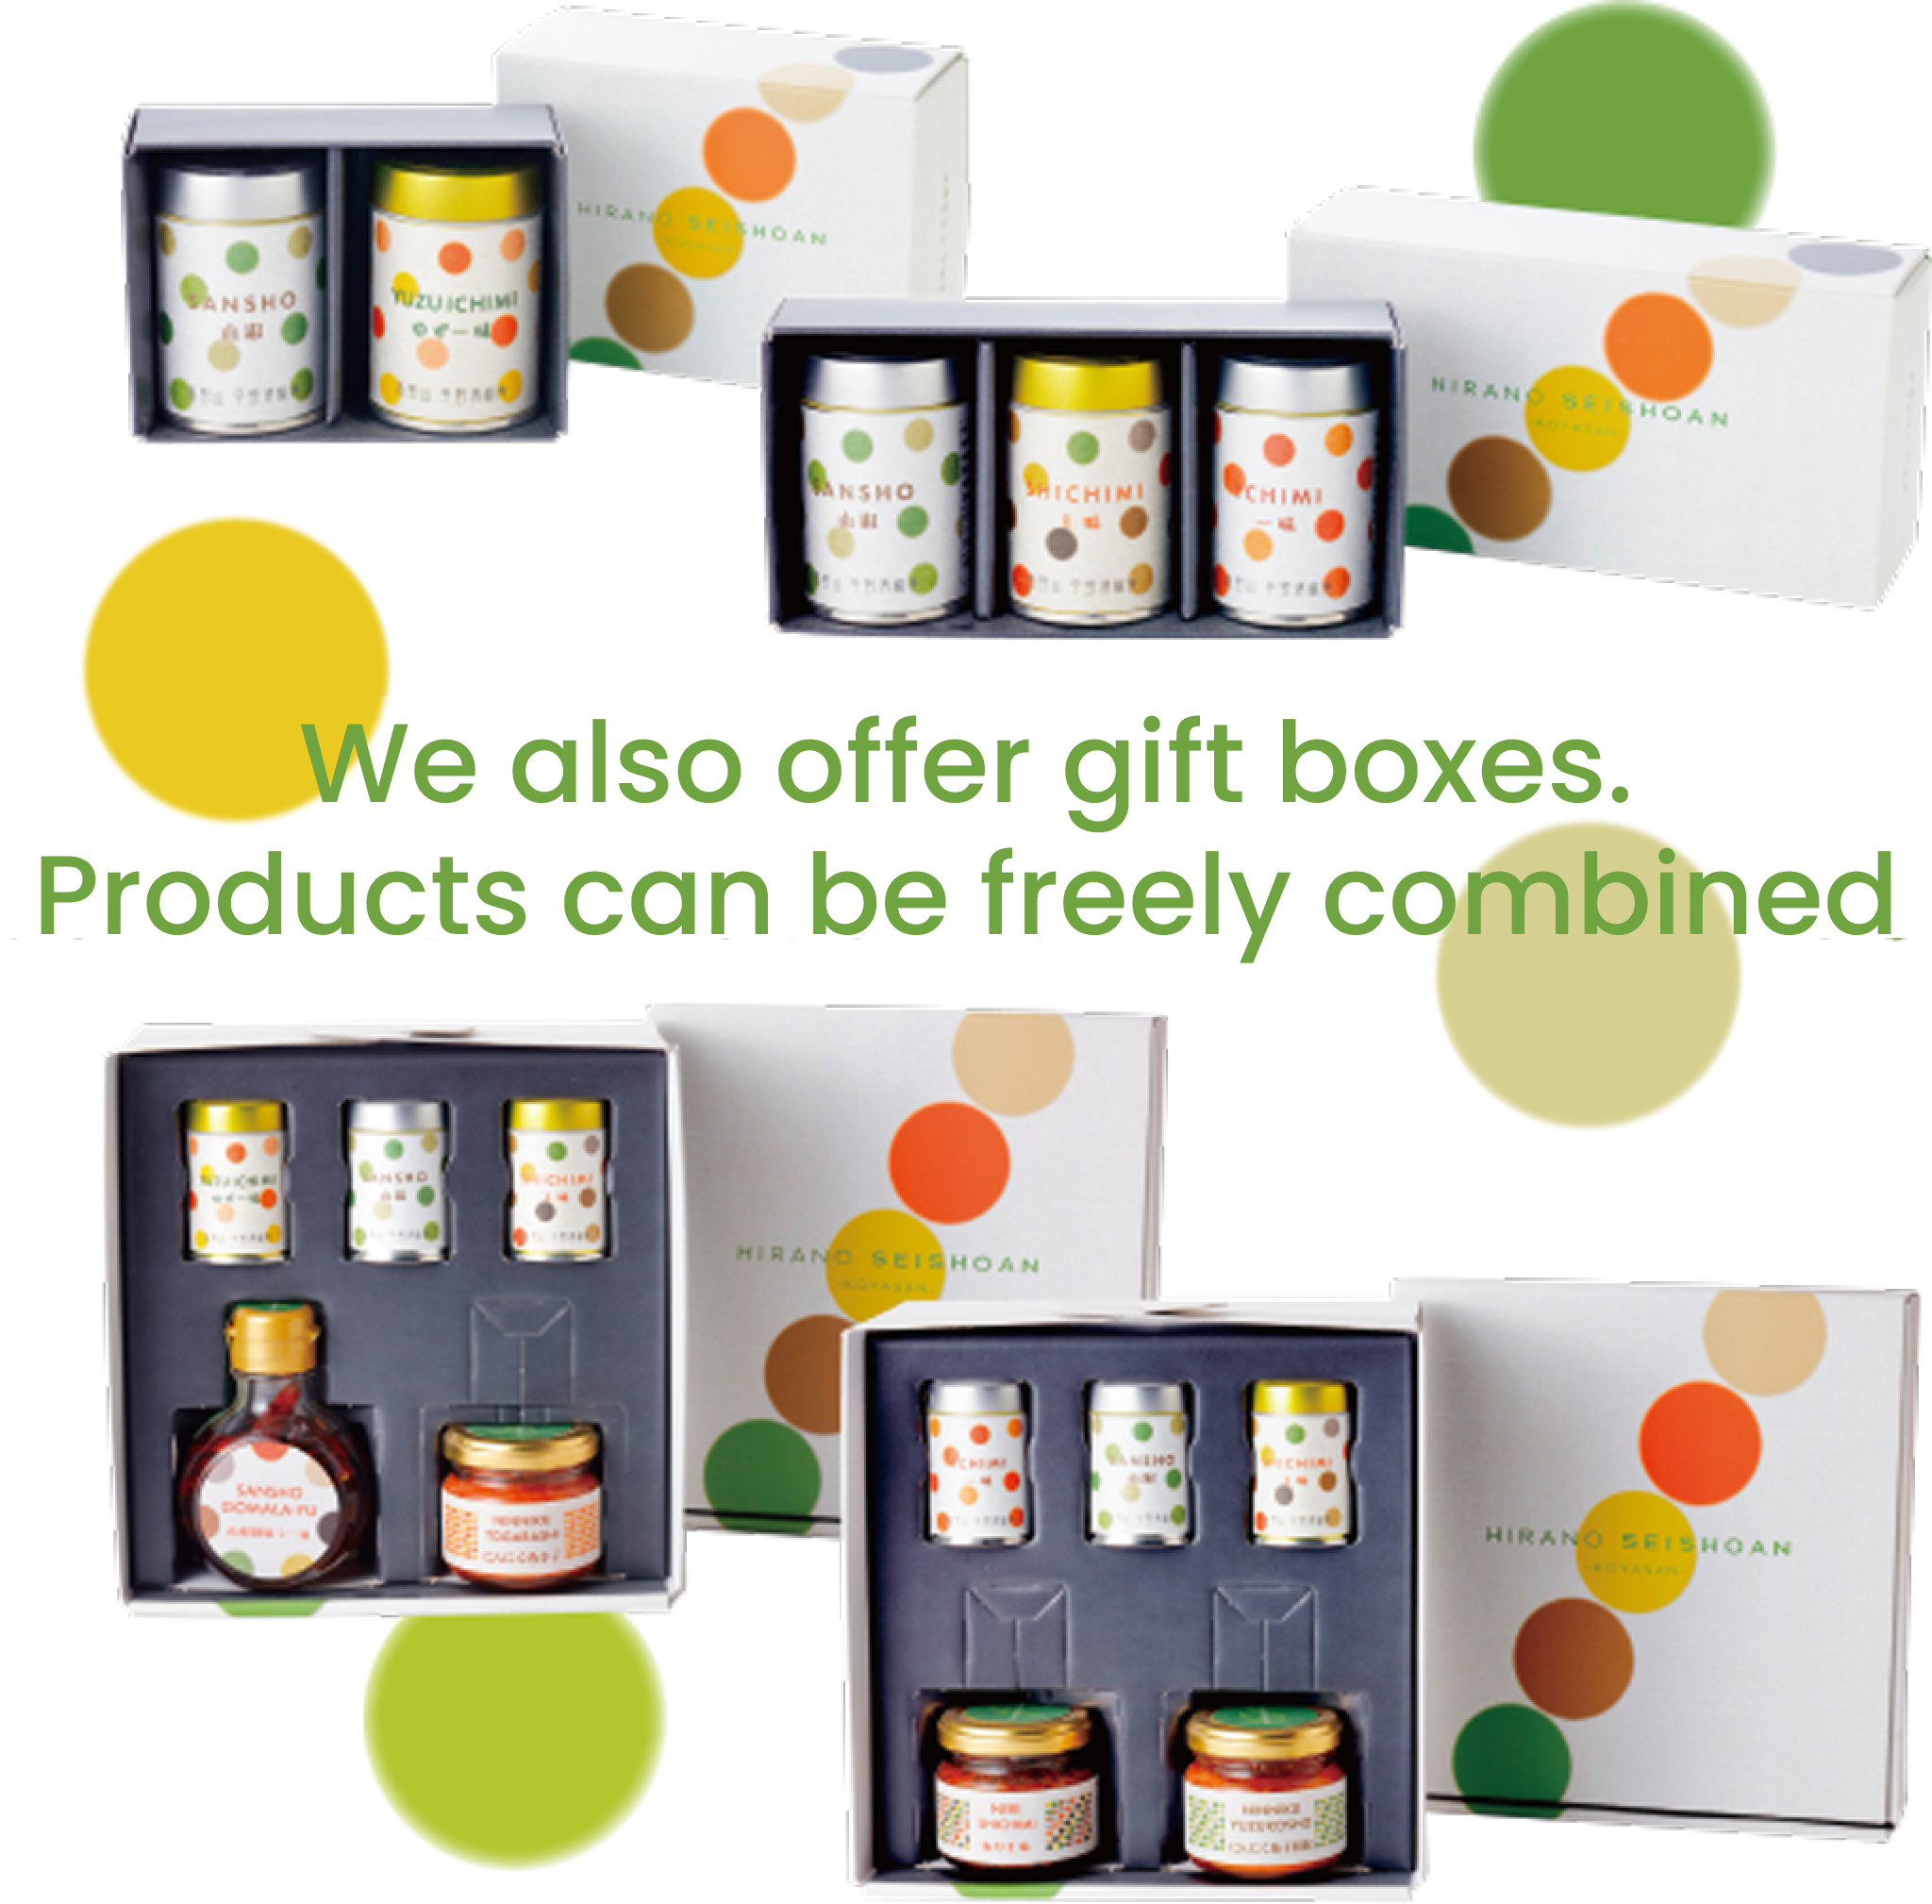 We also offer gift boxes. Products can be freely combined